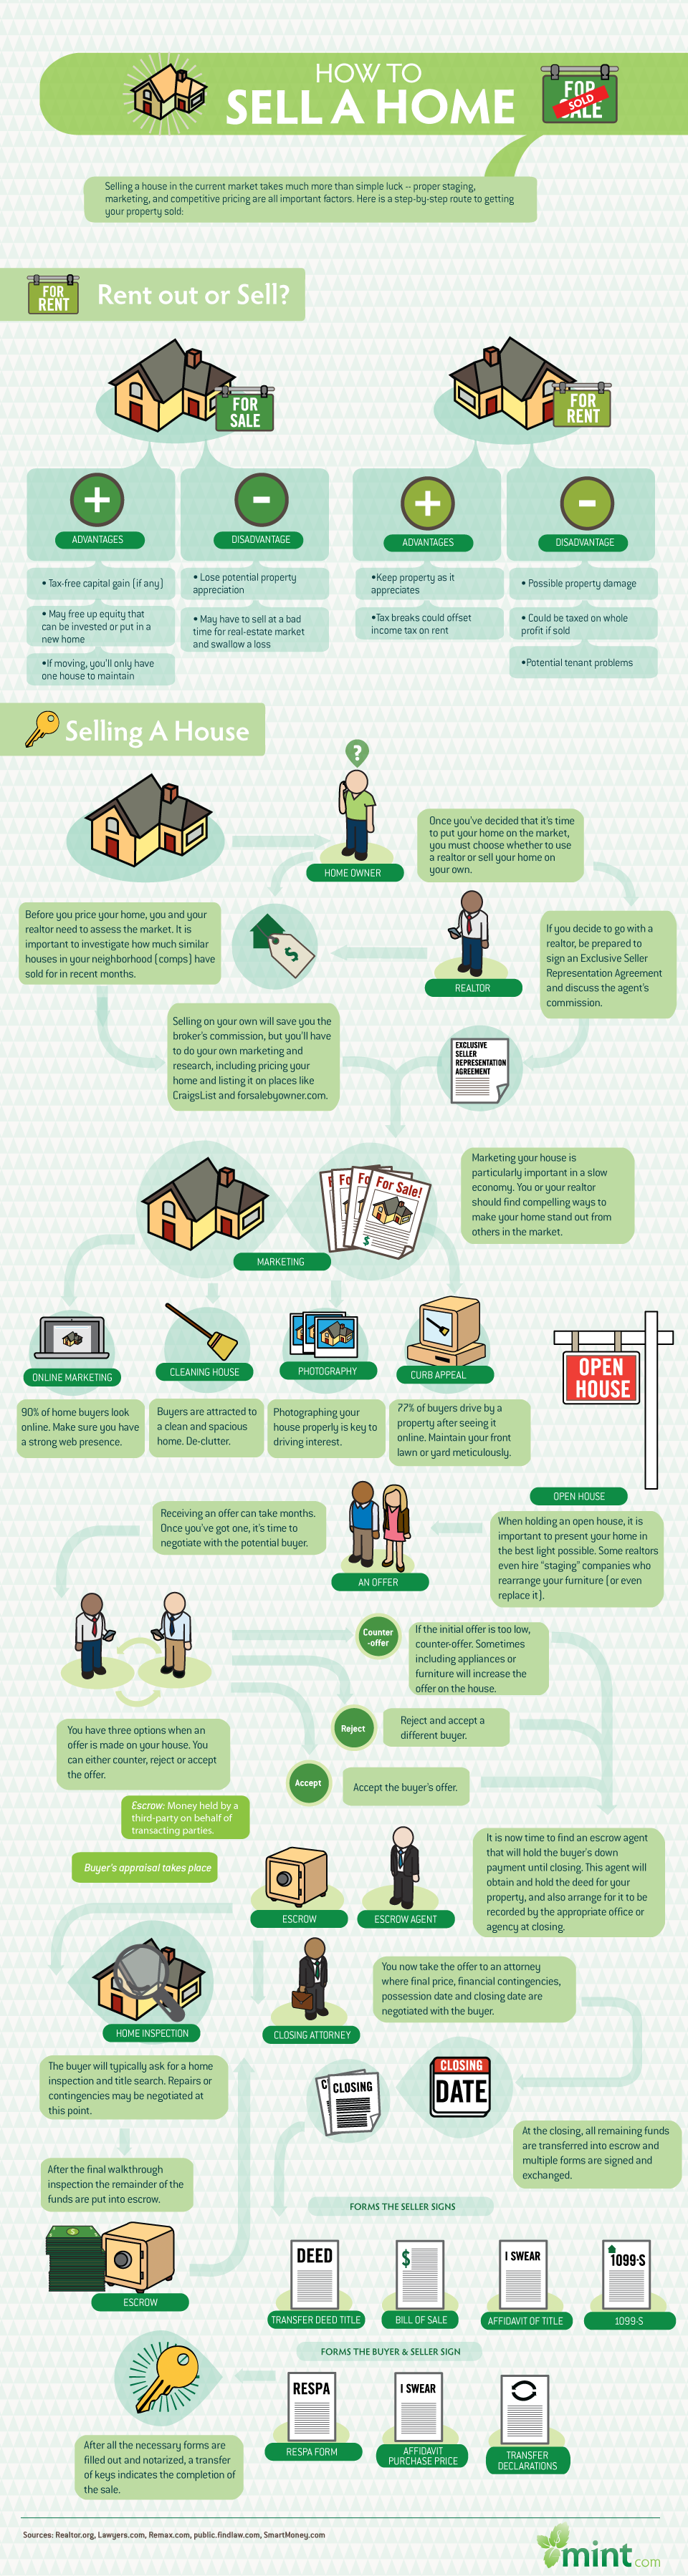 How to Sell a Home Infographic